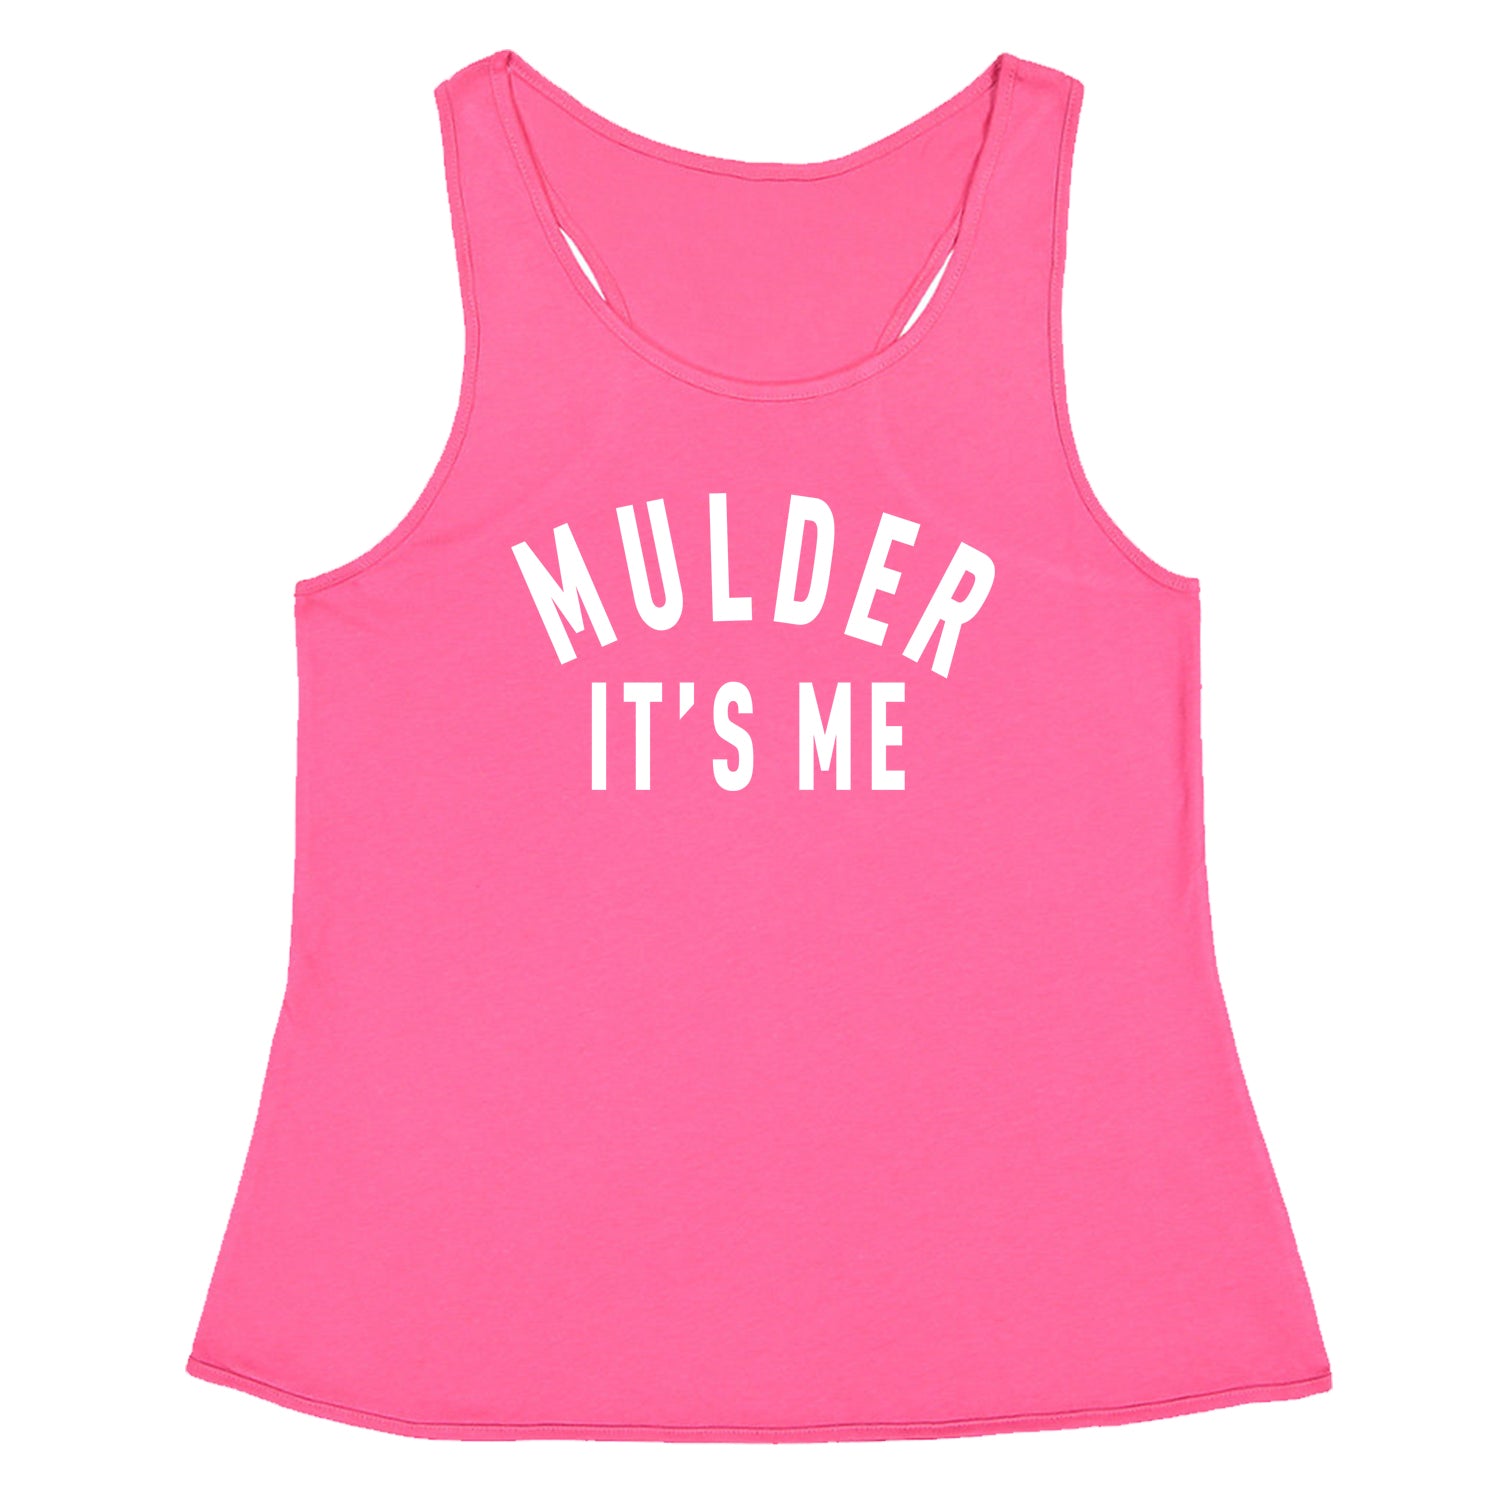 Mulder, It's Me Racerback Tank Top for Women 51, area, believe, files, is, mulder, out, scully, the, there, truth, x, xfiles by Expression Tees